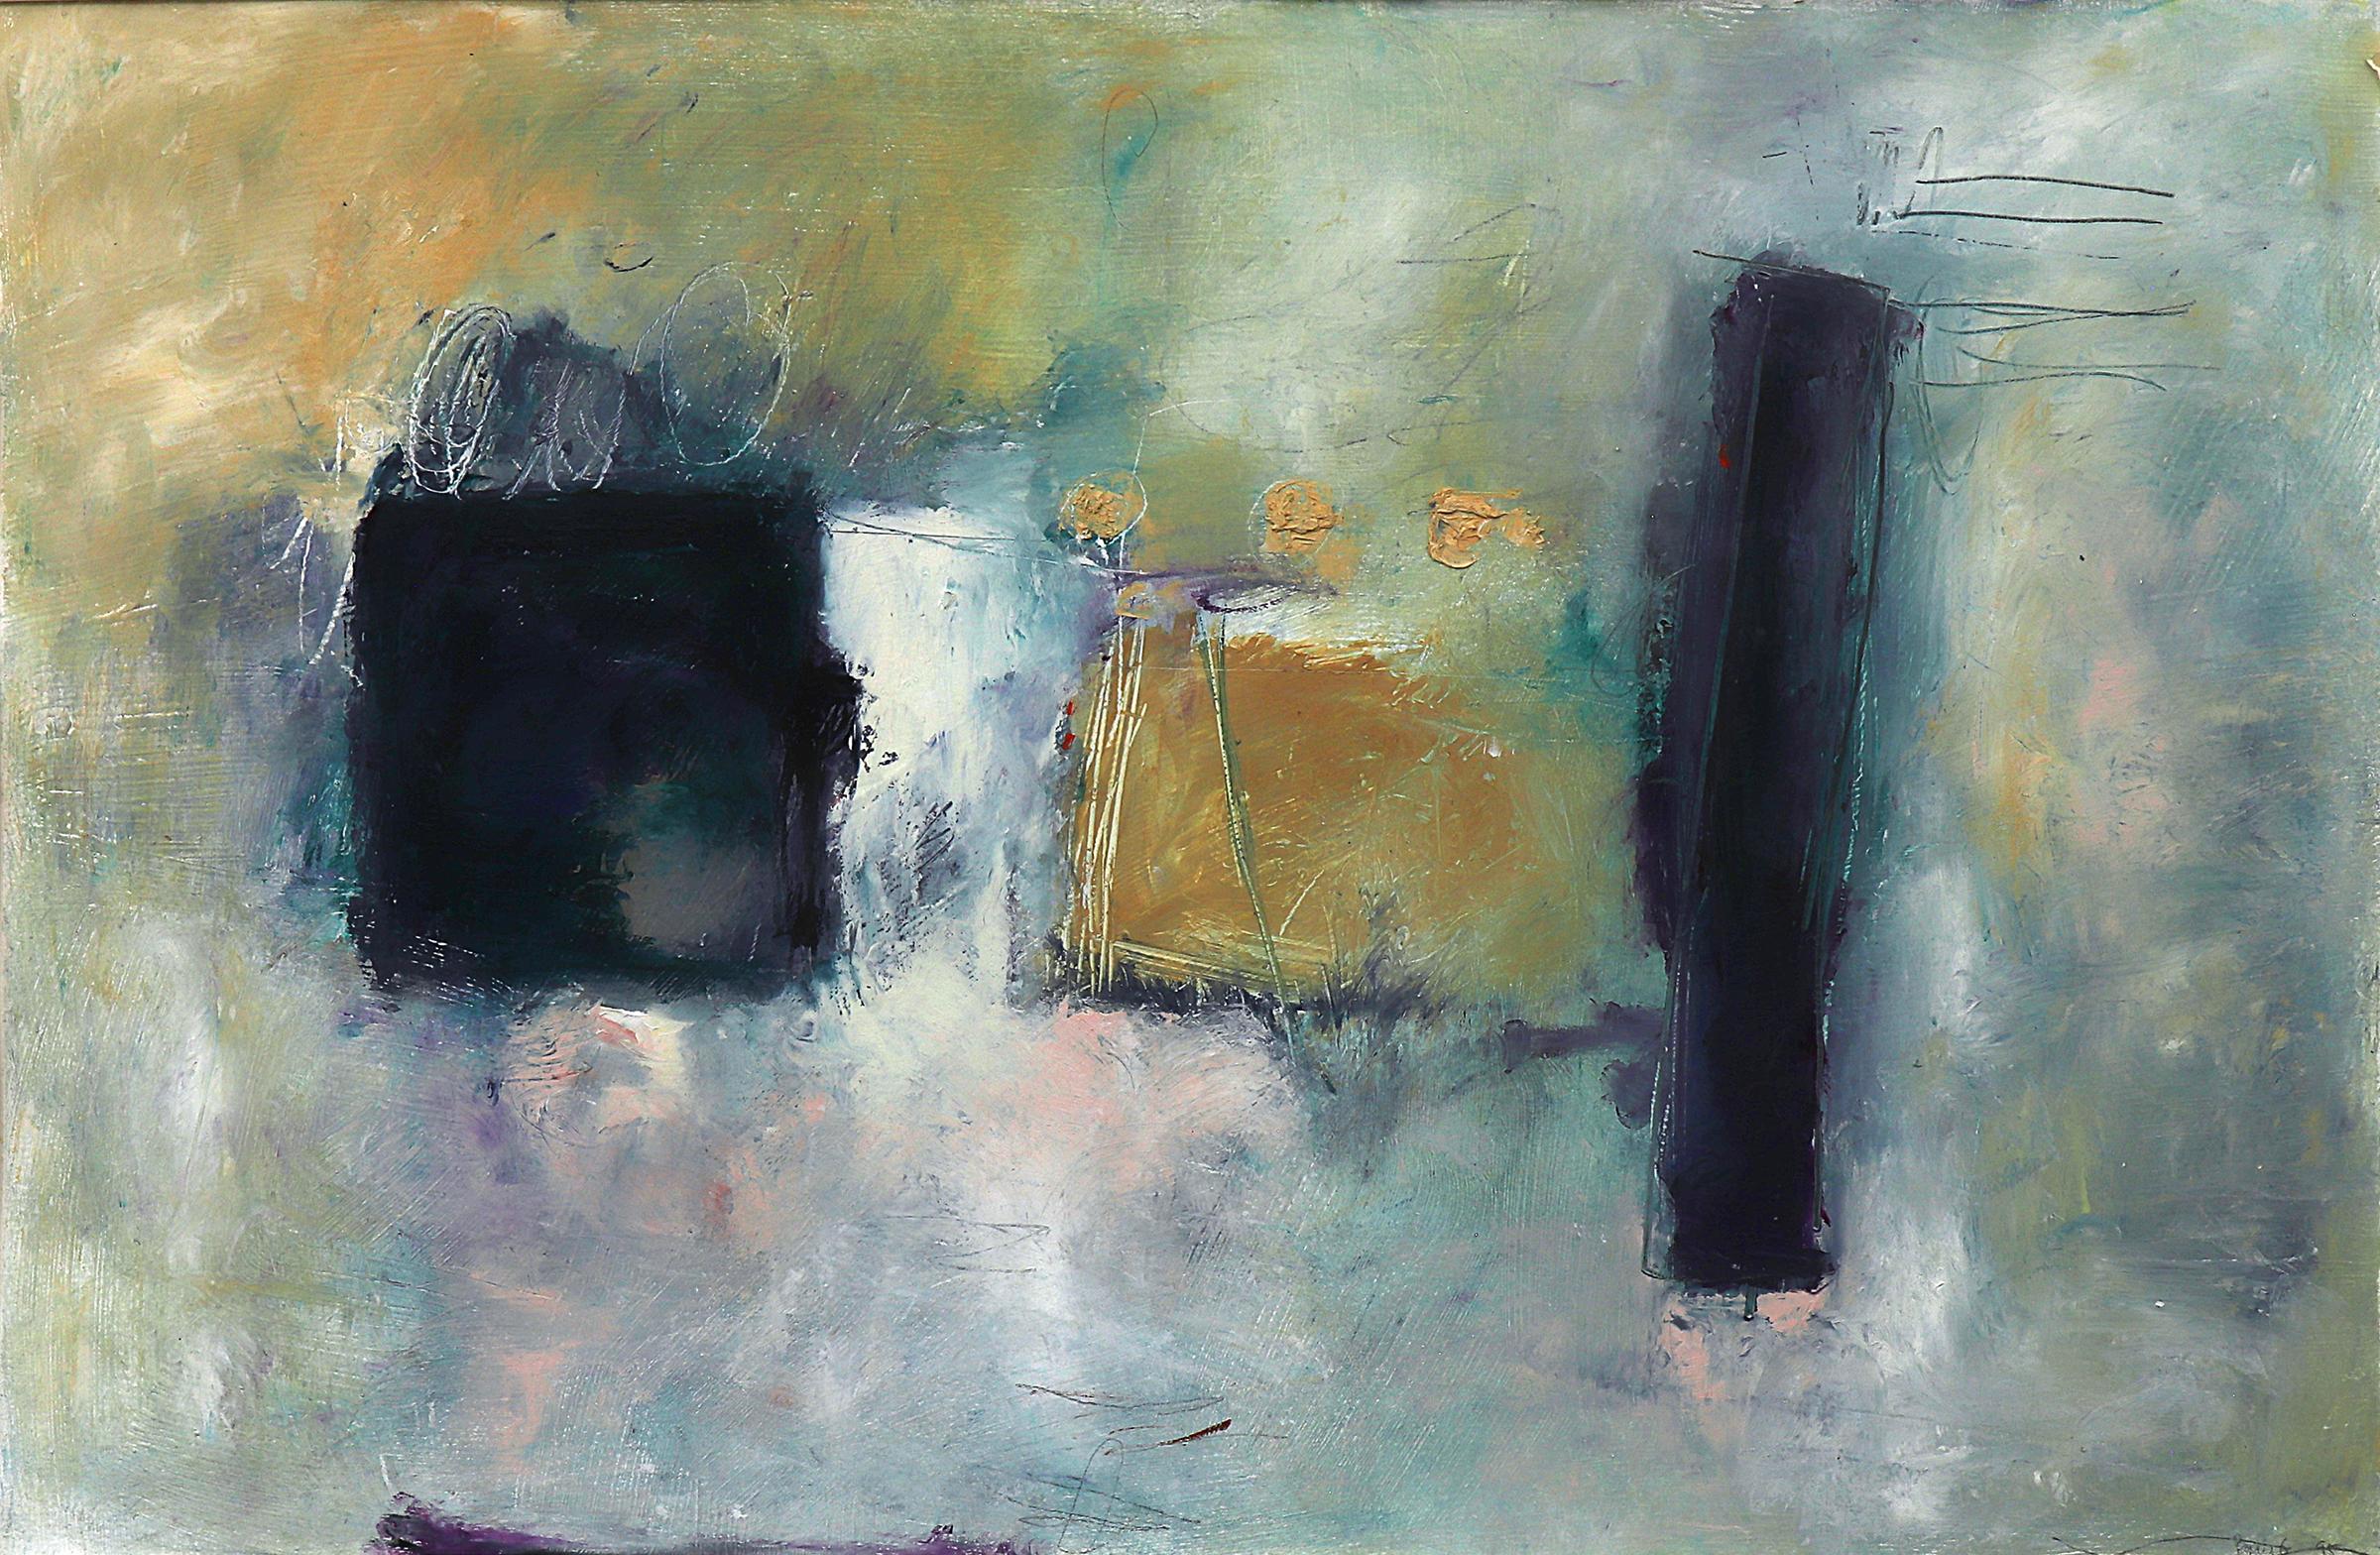 Composition #1, an original vintage 1990s abstract oil painting by Bonney Goldstein. Signed and dated 1995 by the artist, lower right.  Late 20th century painting in colors of golden yellow, dark blue/purple and teal green with violet purple, pink